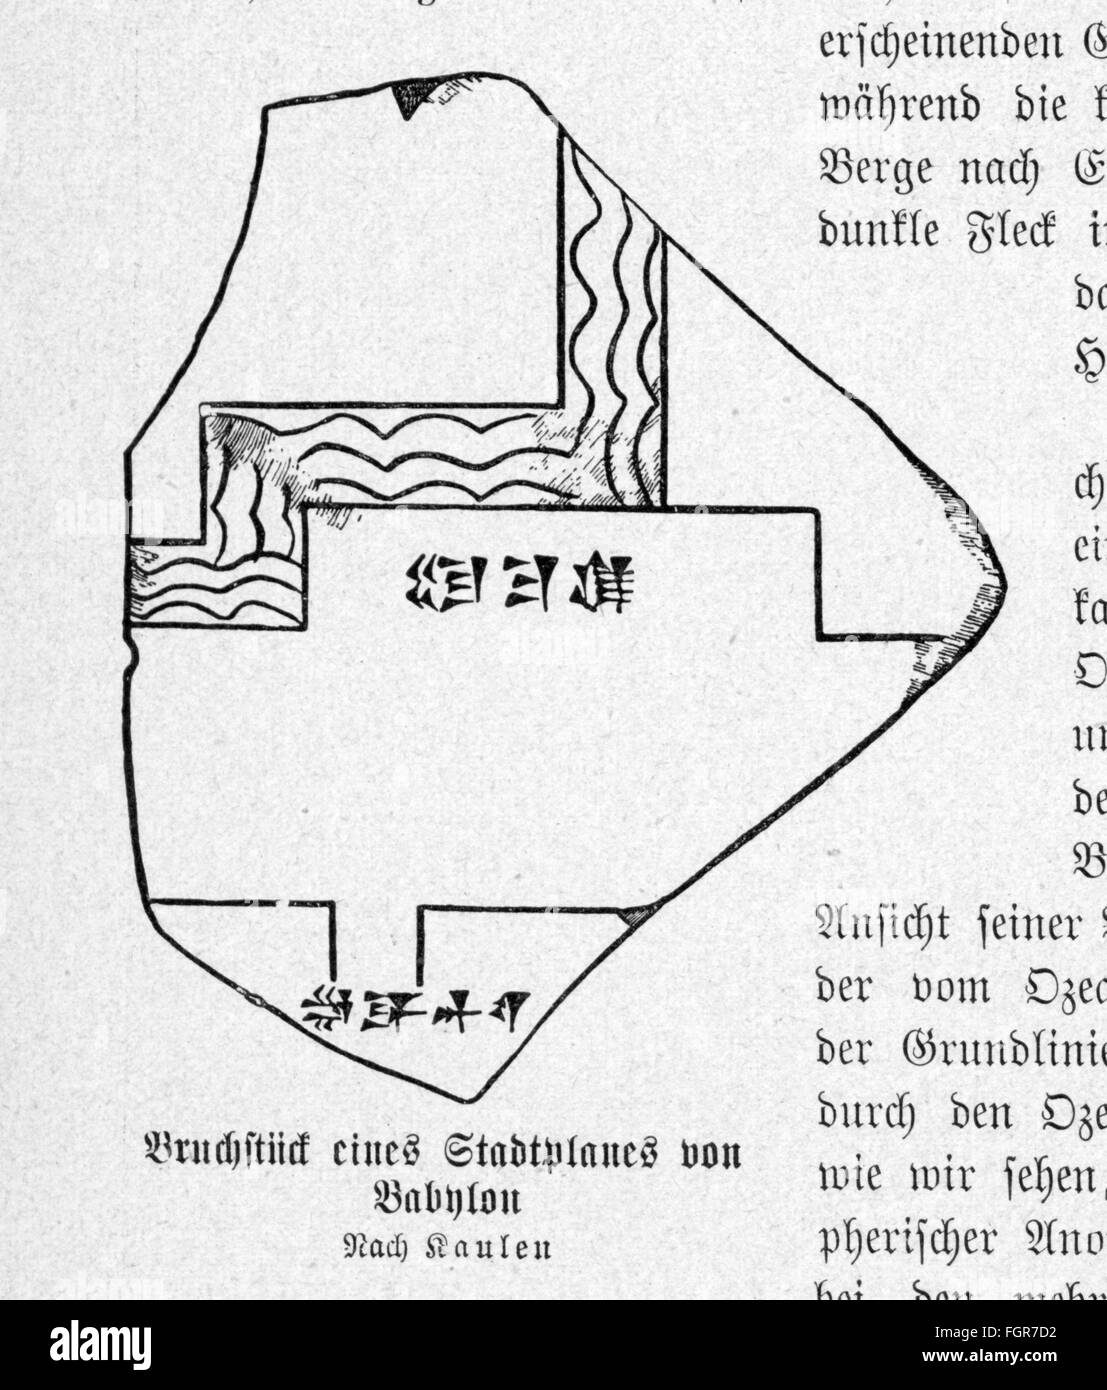 cartography, city map, Babylon, fragment of a city map, 9th century BC, reconstruction after Kaulen, wood engraving, 19th century, prehistory, prehistoric times, Mesopotamia, Asia, script, scripts, river, rivers, segments, floating segment, part, parts, pieces, piece, cartography, map printing, fragment, fragments, city map, street map, city maps, street maps, historic, historical, Additional-Rights-Clearences-Not Available Stock Photo